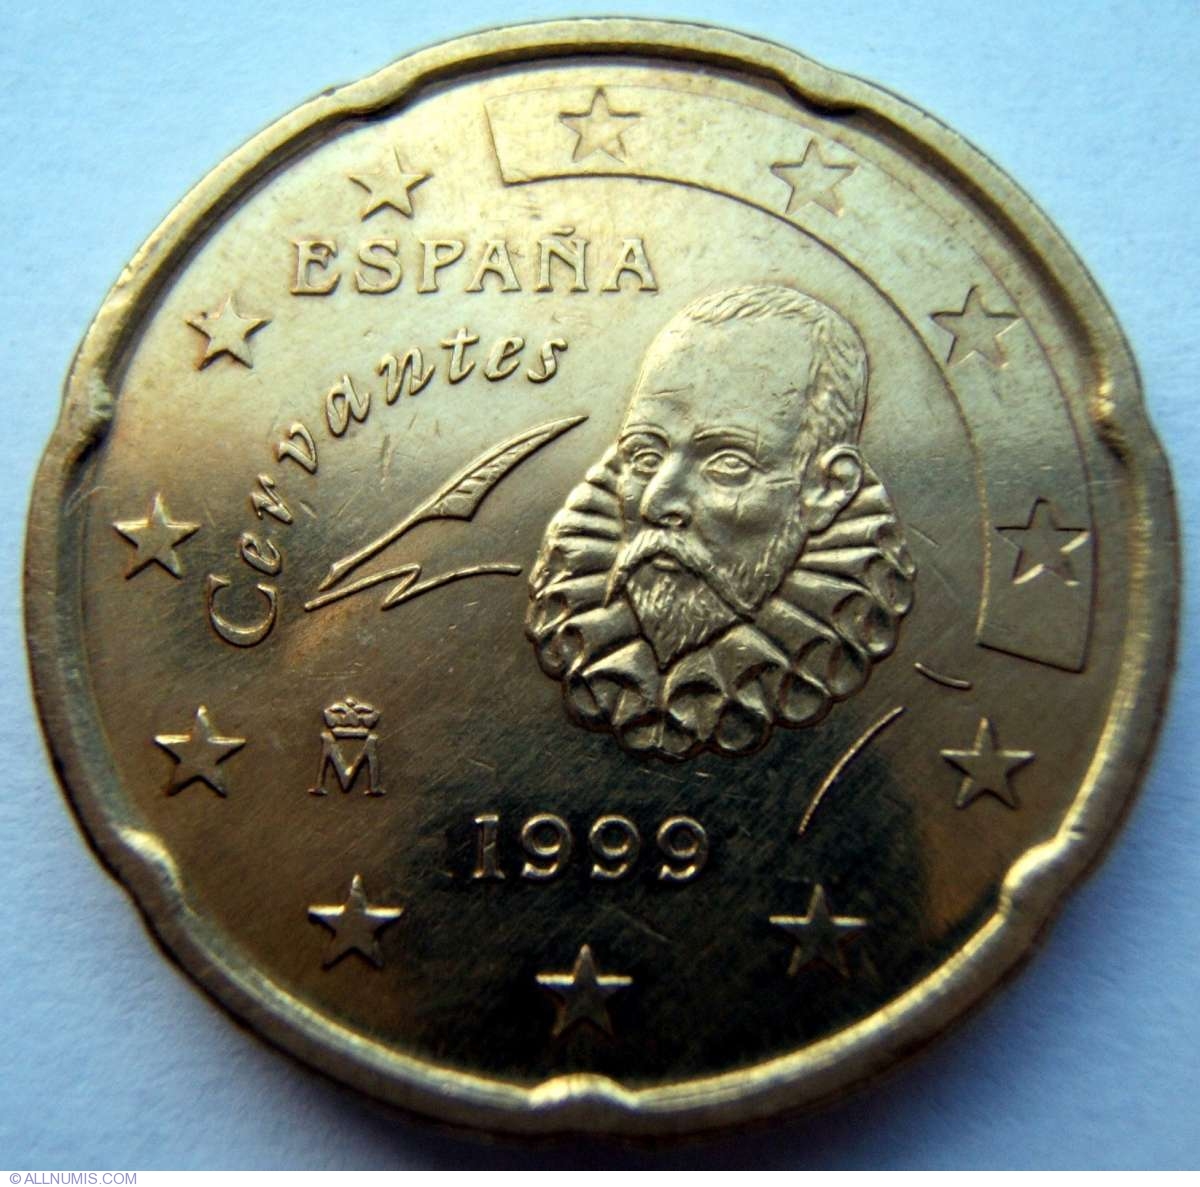 20 euro cent coin images